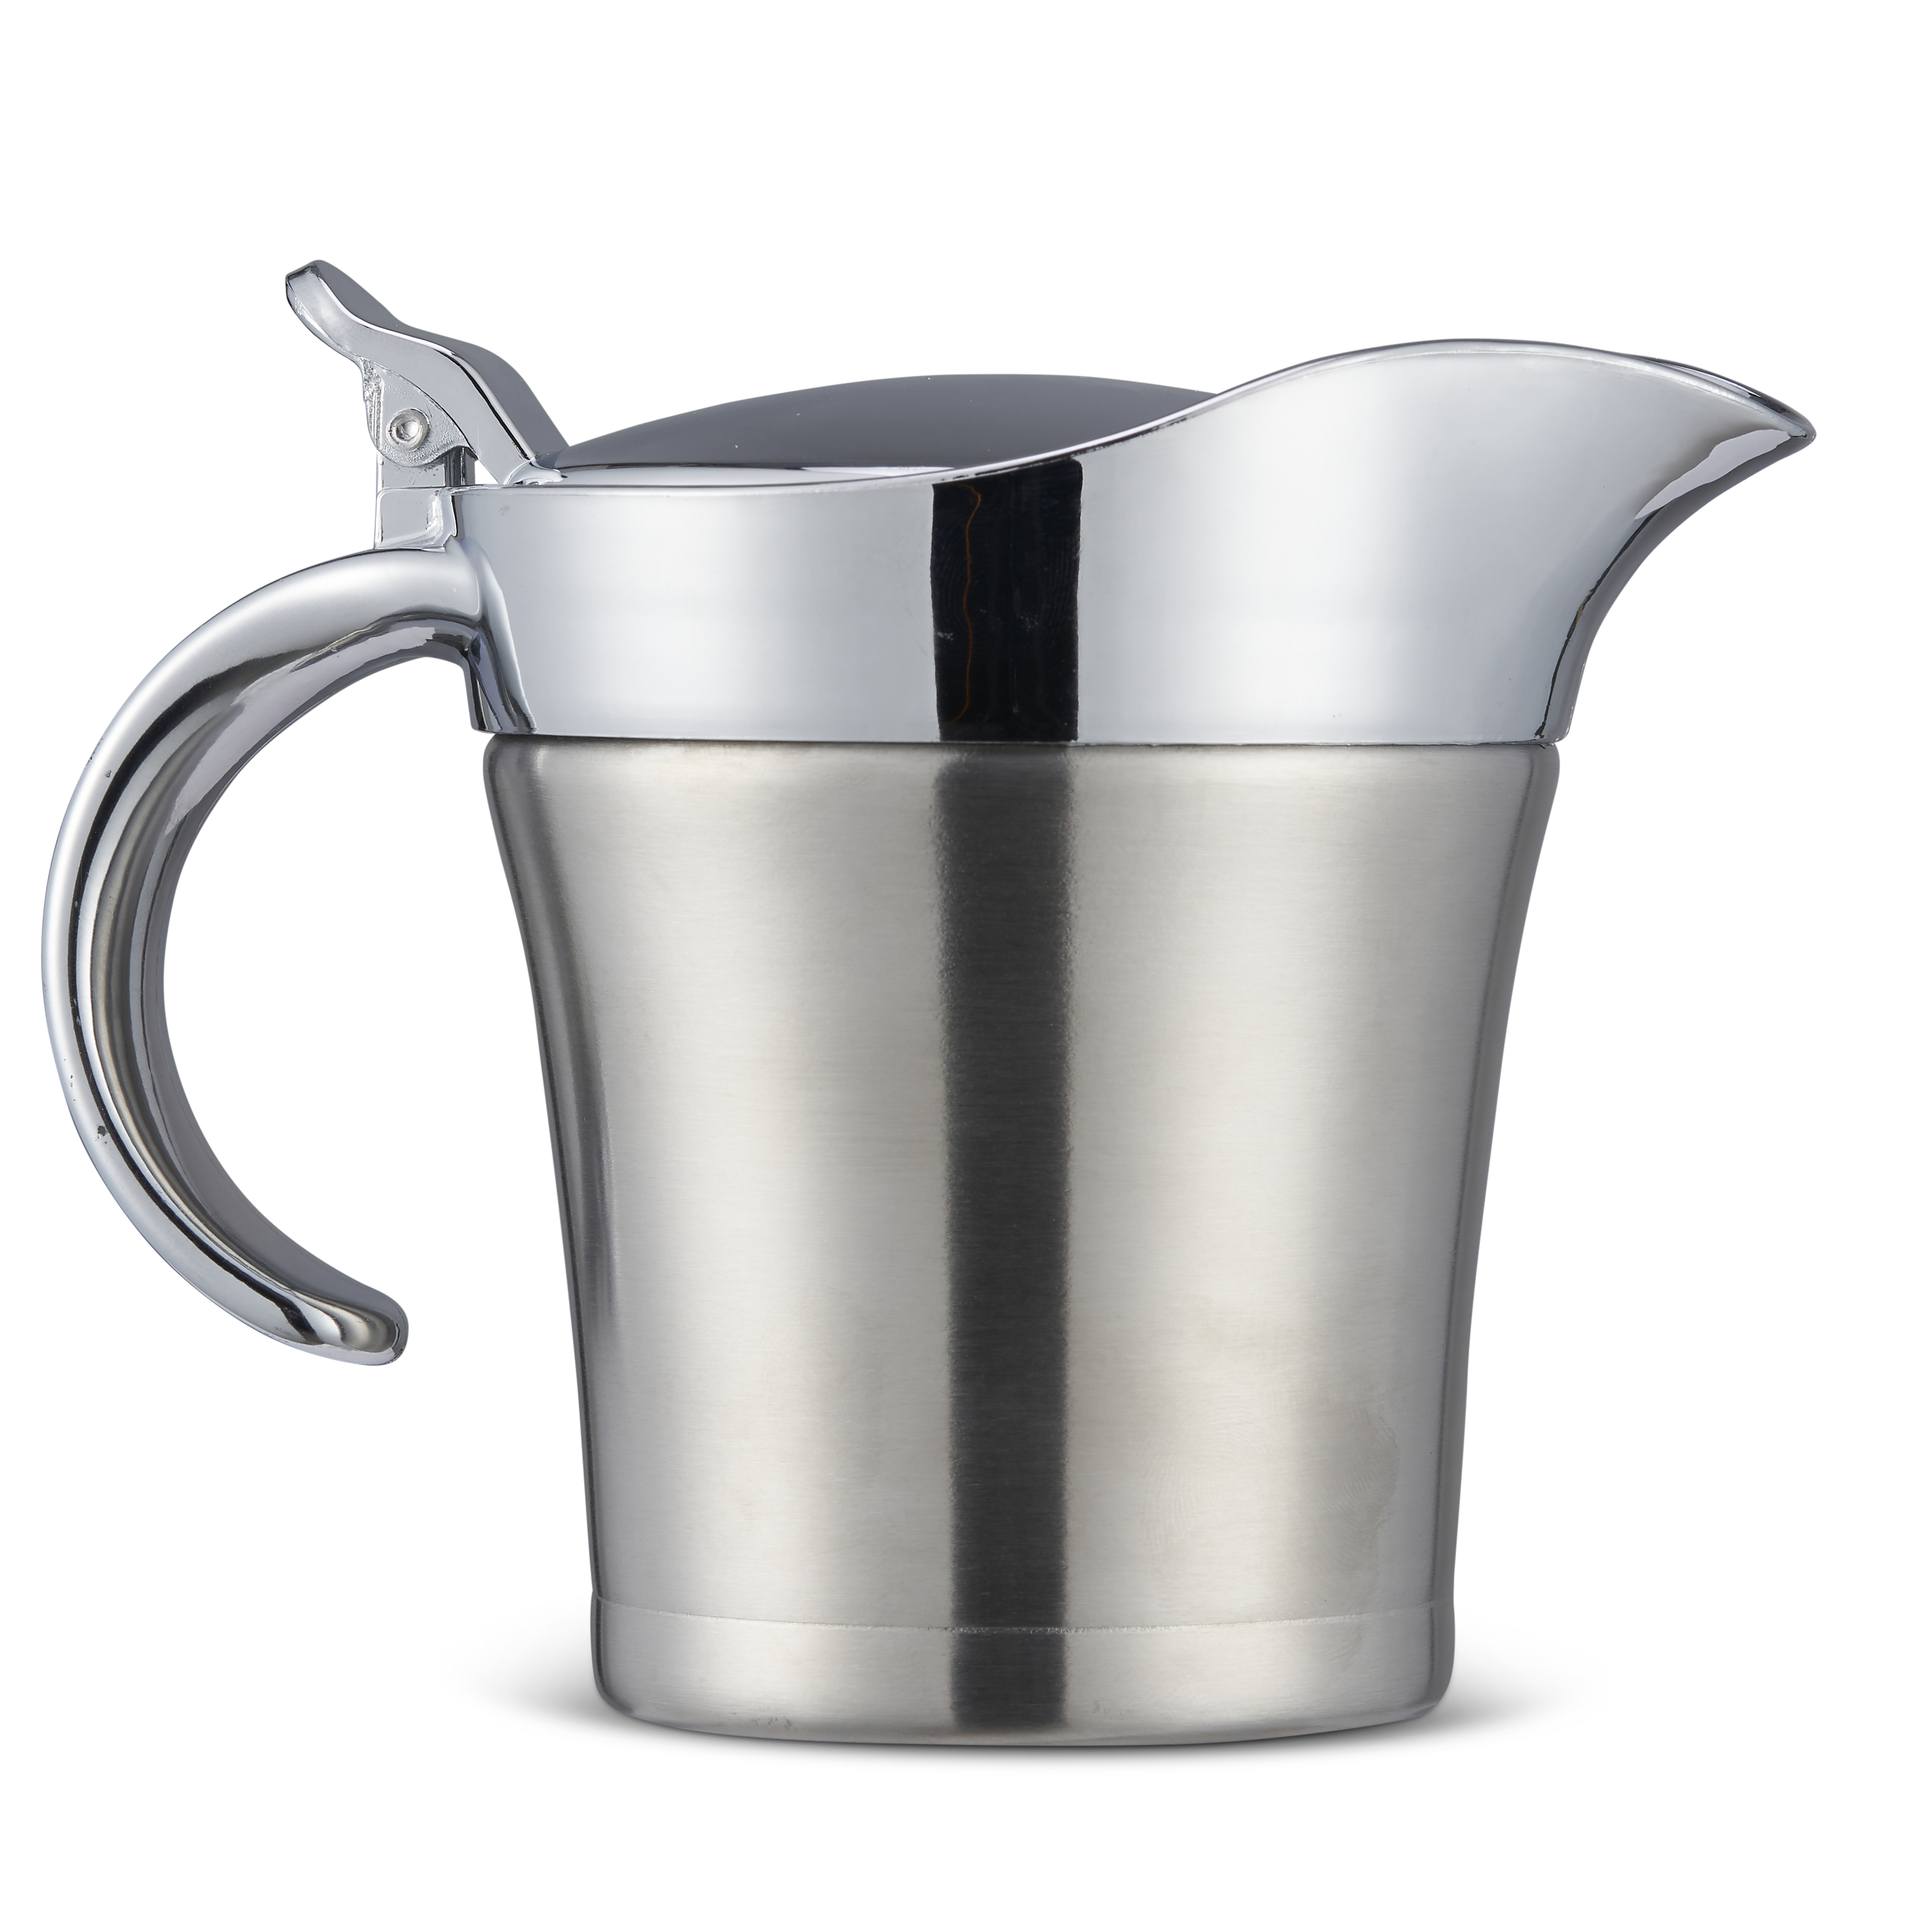 Double Walled Insulated Sauce Jug